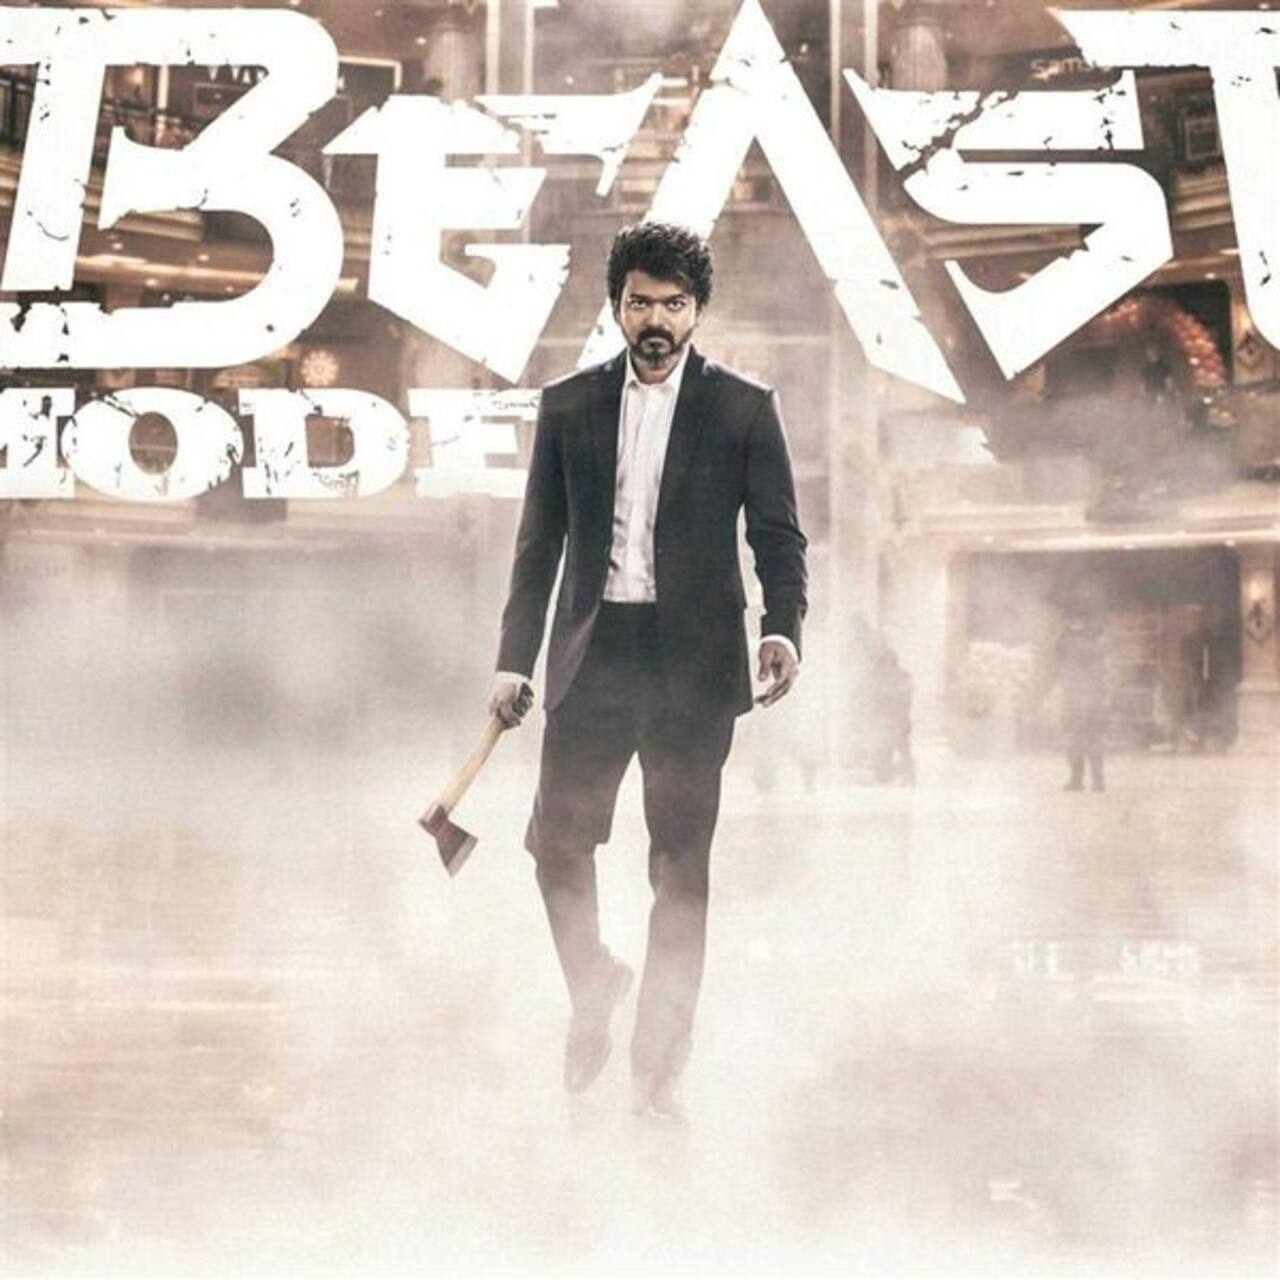 Beast: Thalapathy Vijay starrer’s advanced booking overtakes Valima’s lifetime collection